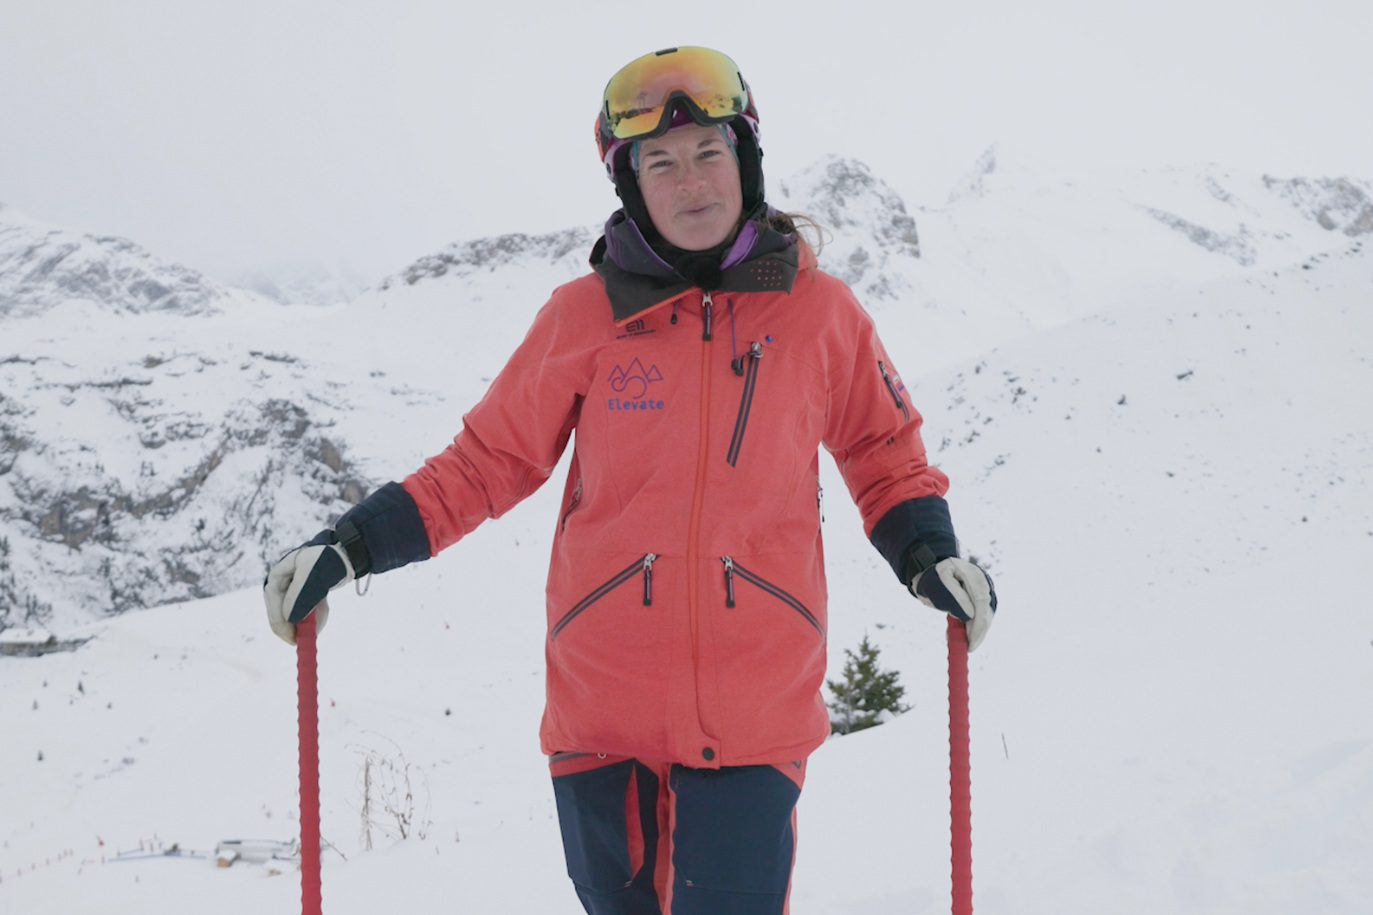 Learn How to Perform Carved Turns on Your Skis, With Lizzy B.